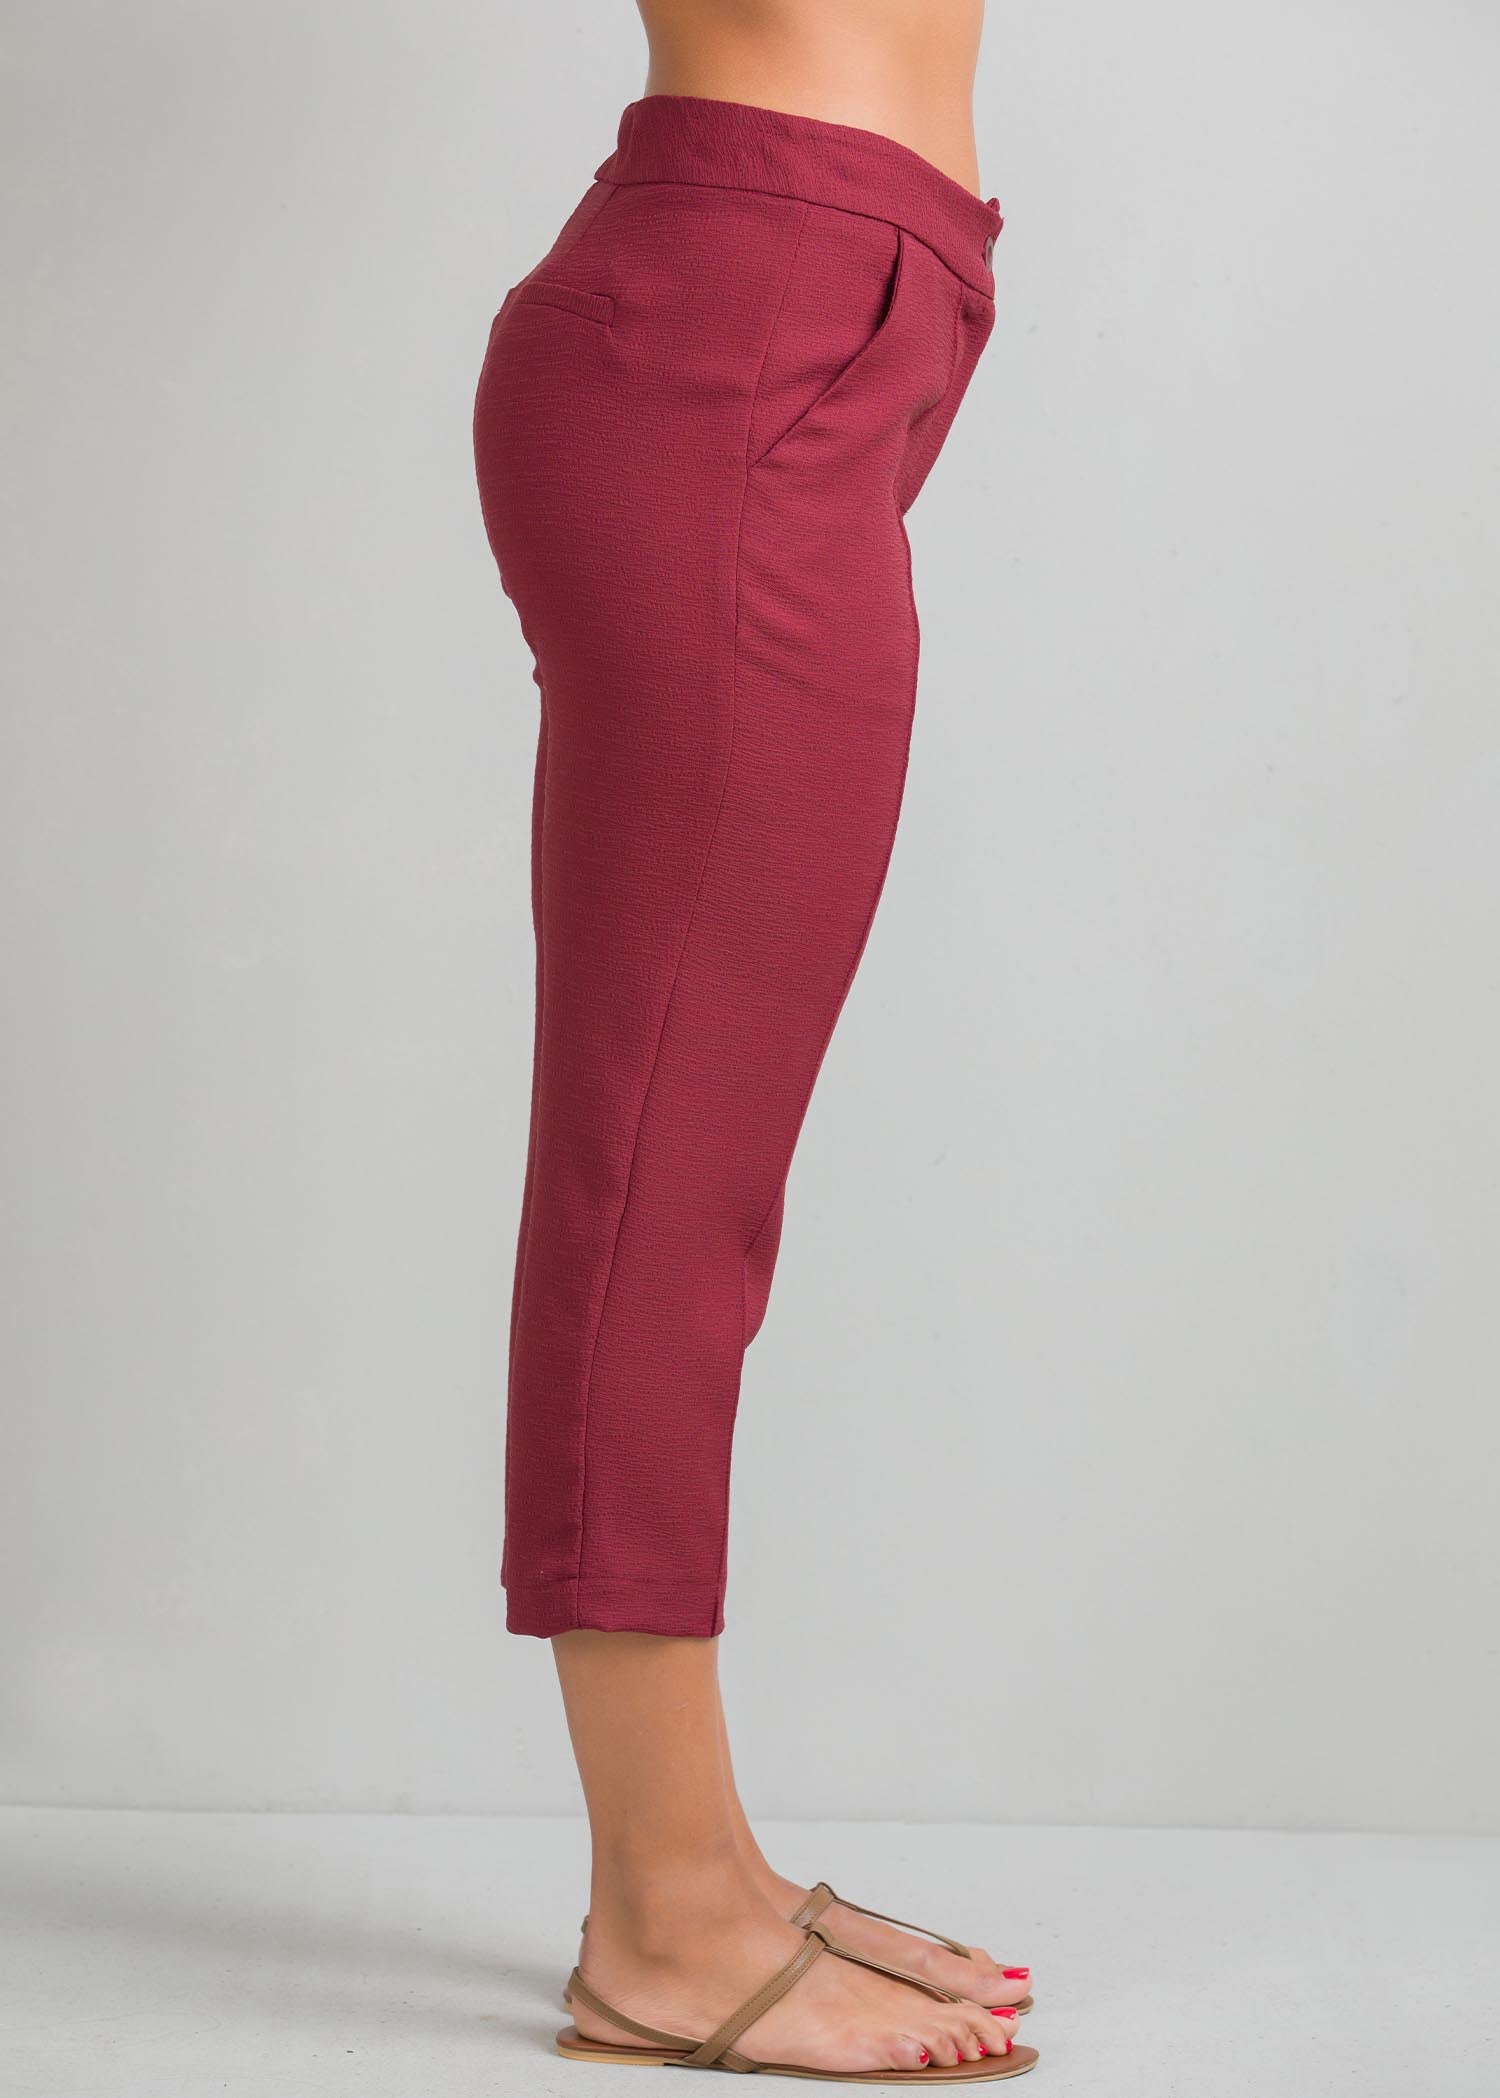 Cropped length pant